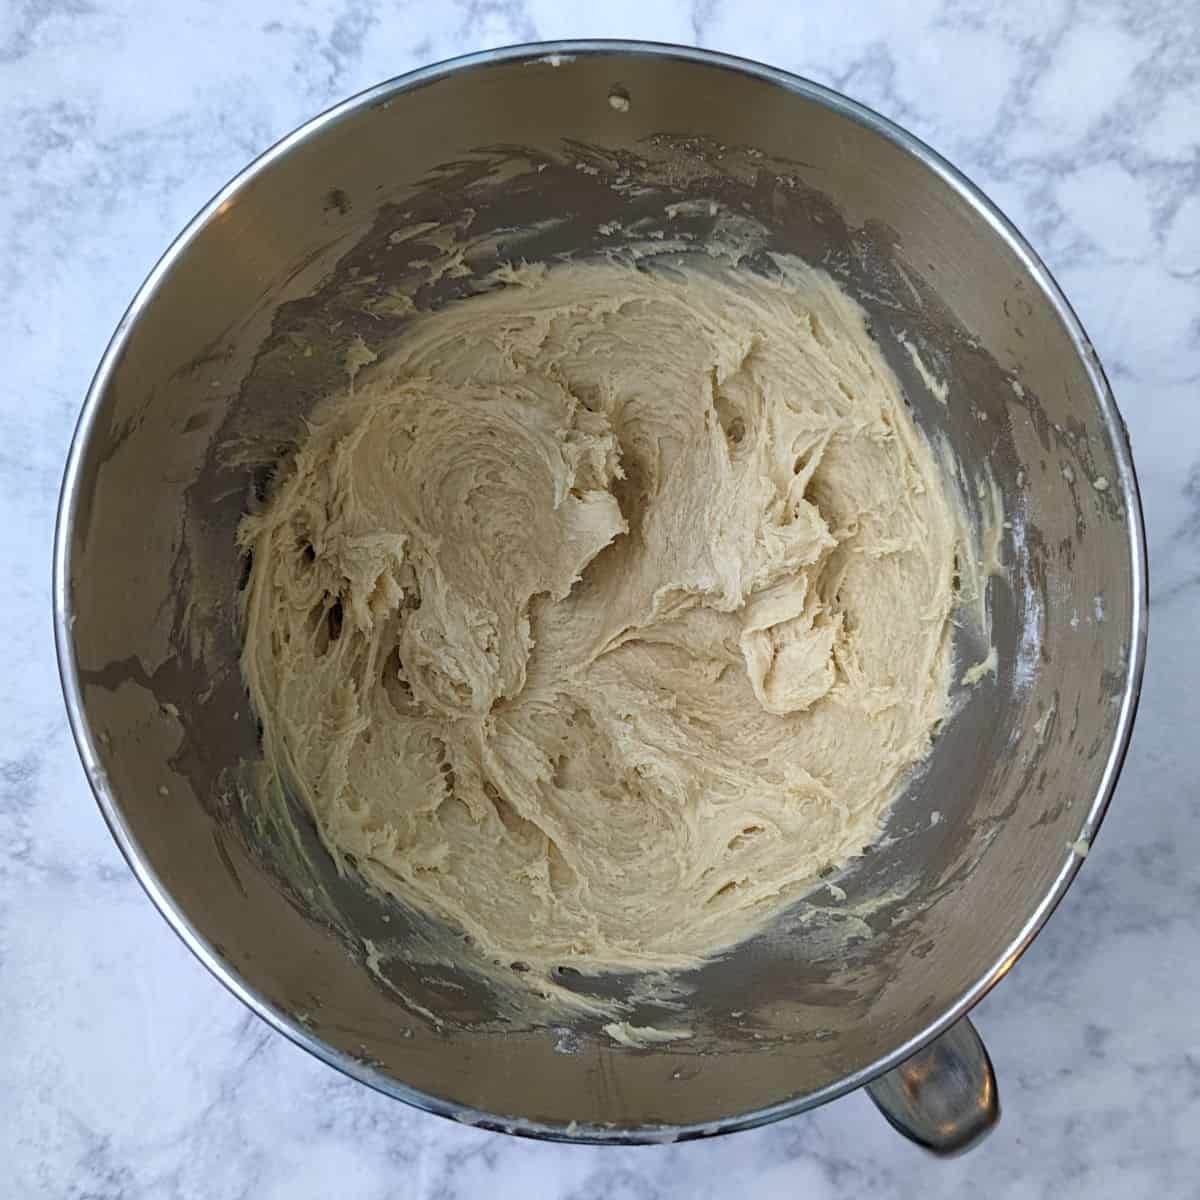 dough after 5 minutes of mixing